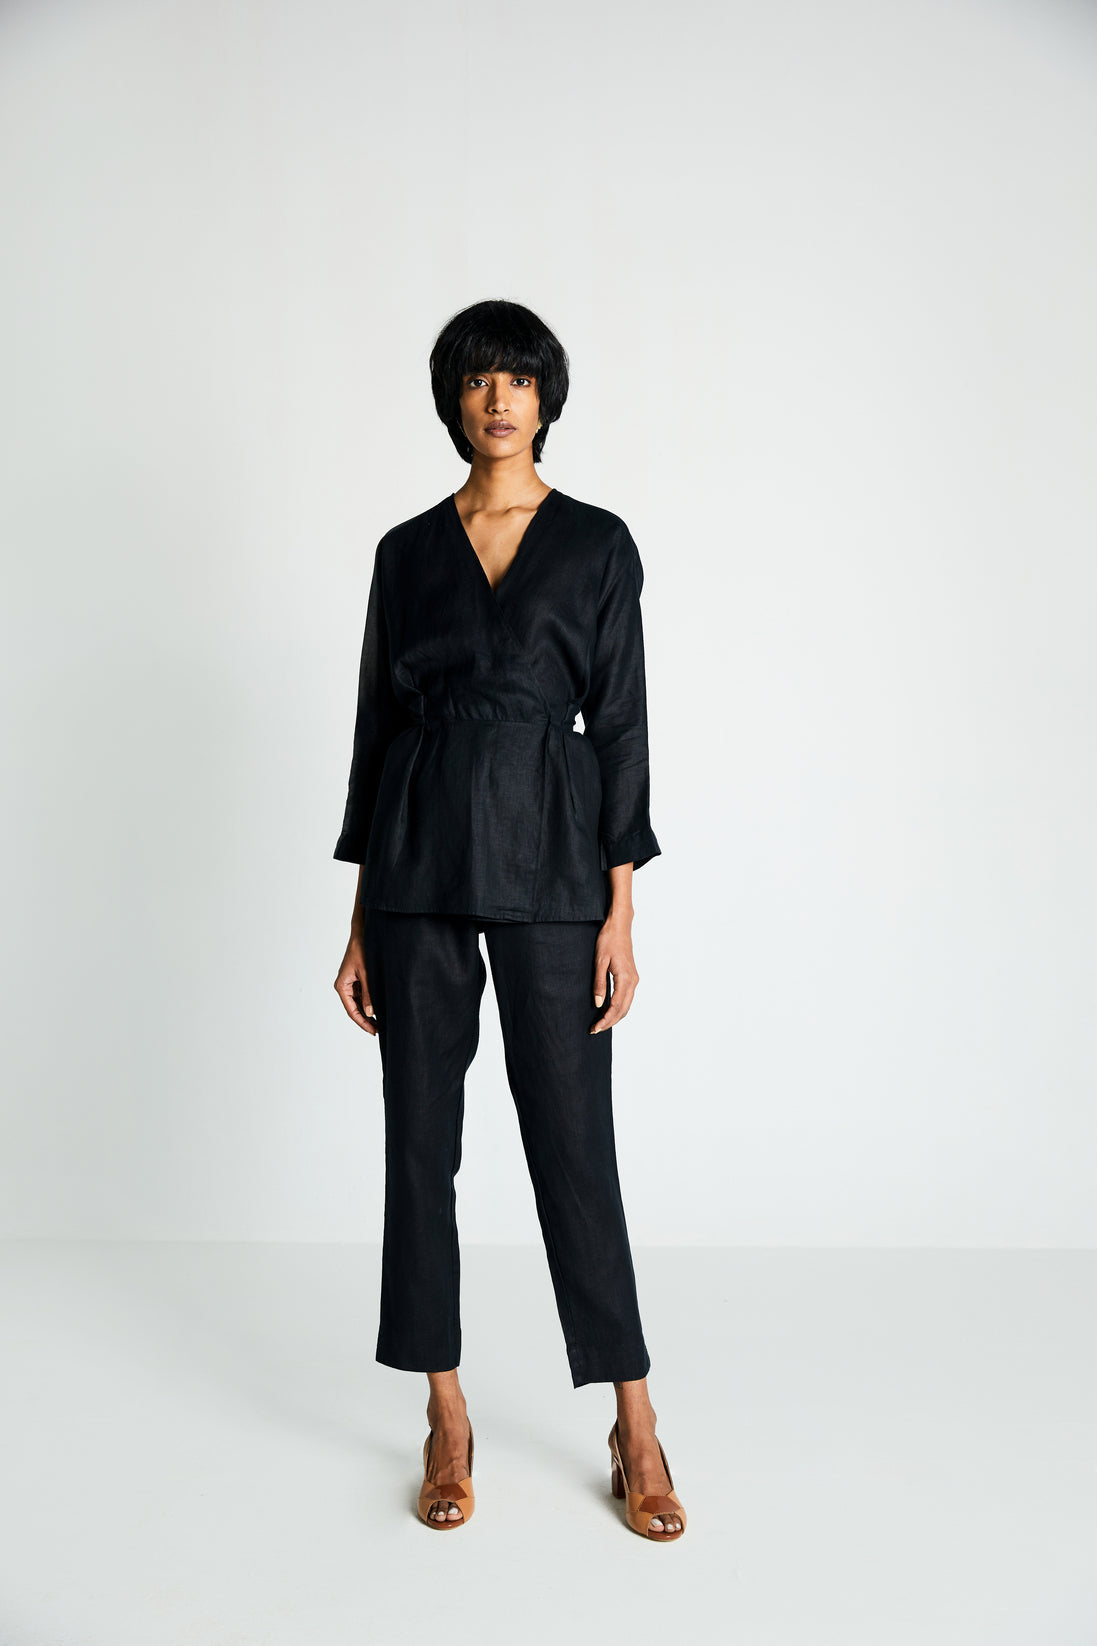 The Power Moves Wrap top at Kamakhyaa by Reistor. This item is Black, Casual Wear, Hemp, Natural, Noir, Regular Fit, Solids, Tops, Womenswear, Wrap Tops